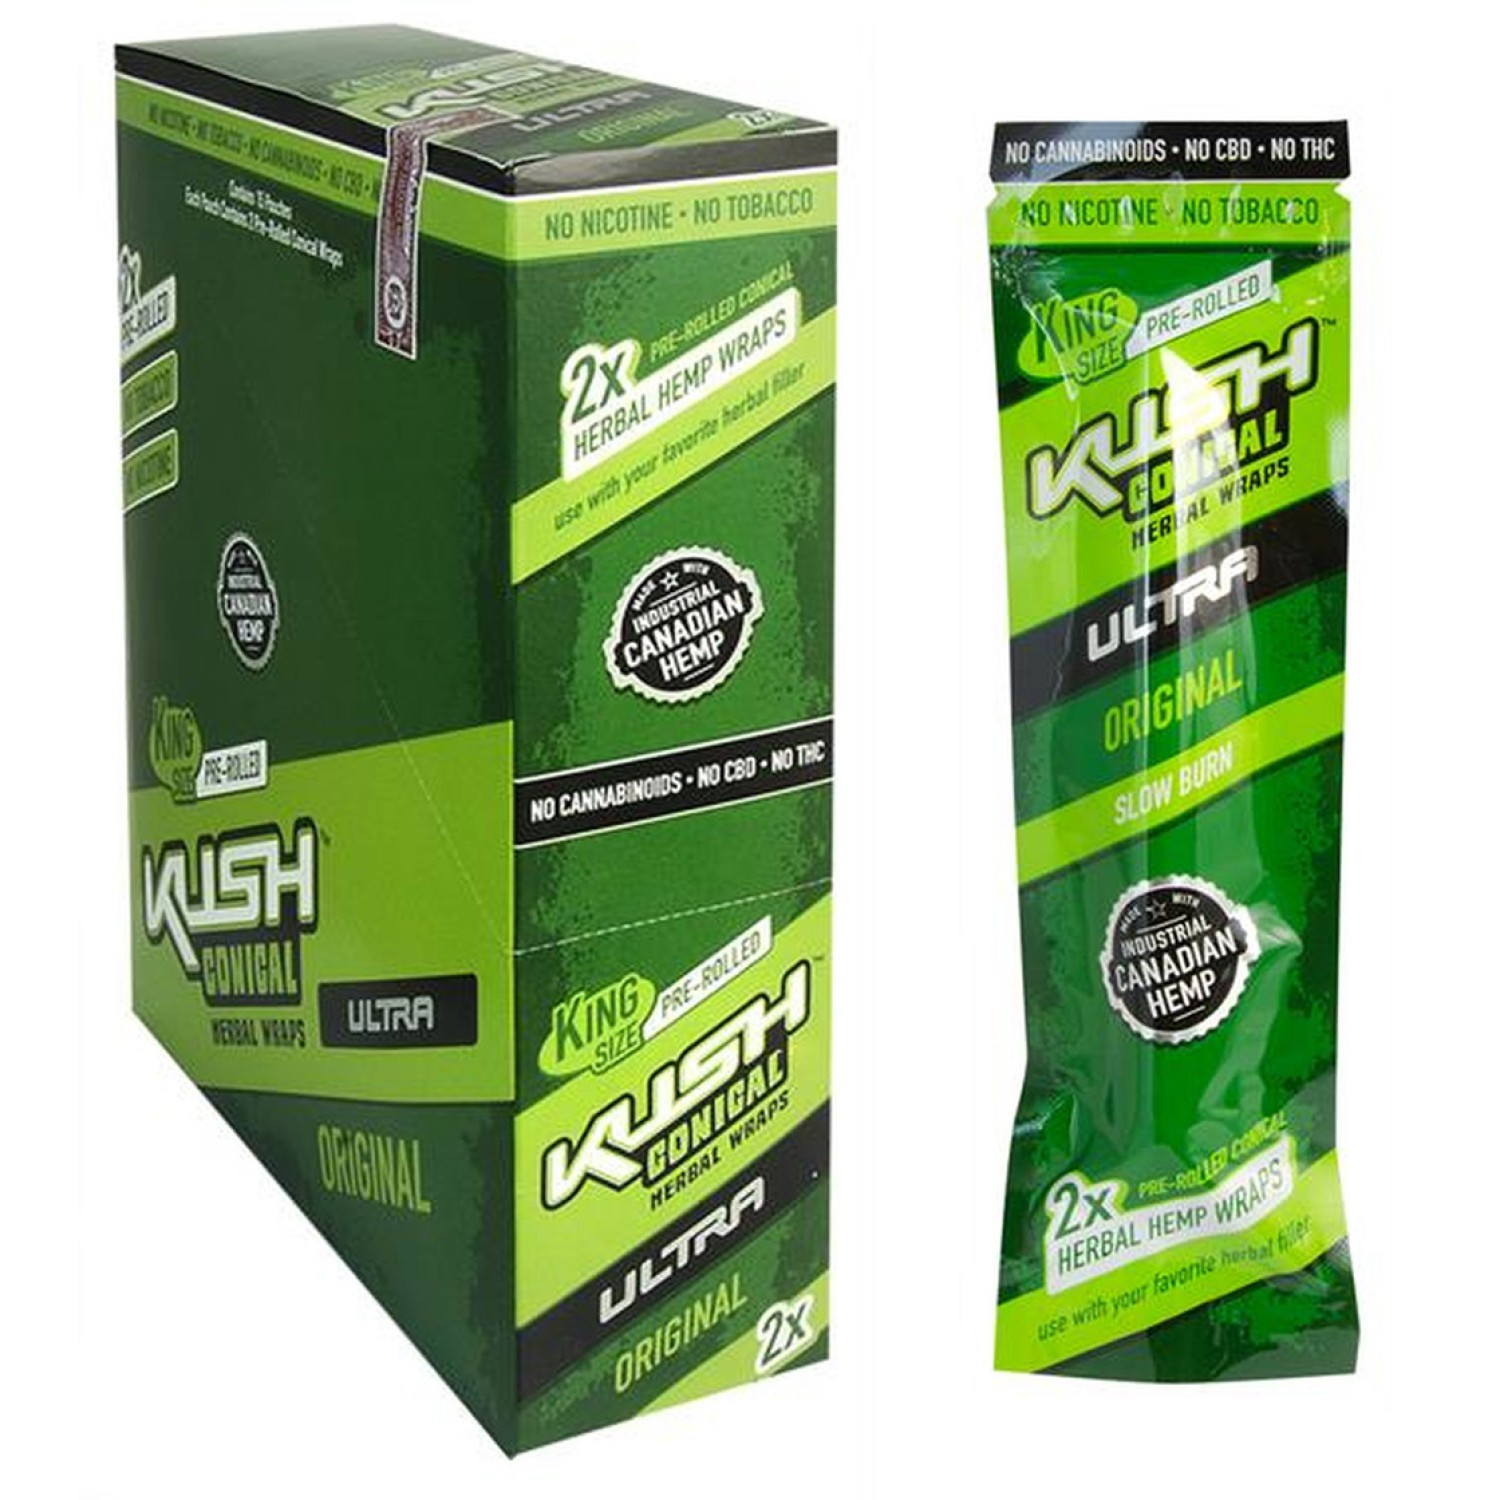 Original/Natur - Kush Ultra Conical Herbal Wraps King Size - Double Cones 15er Box